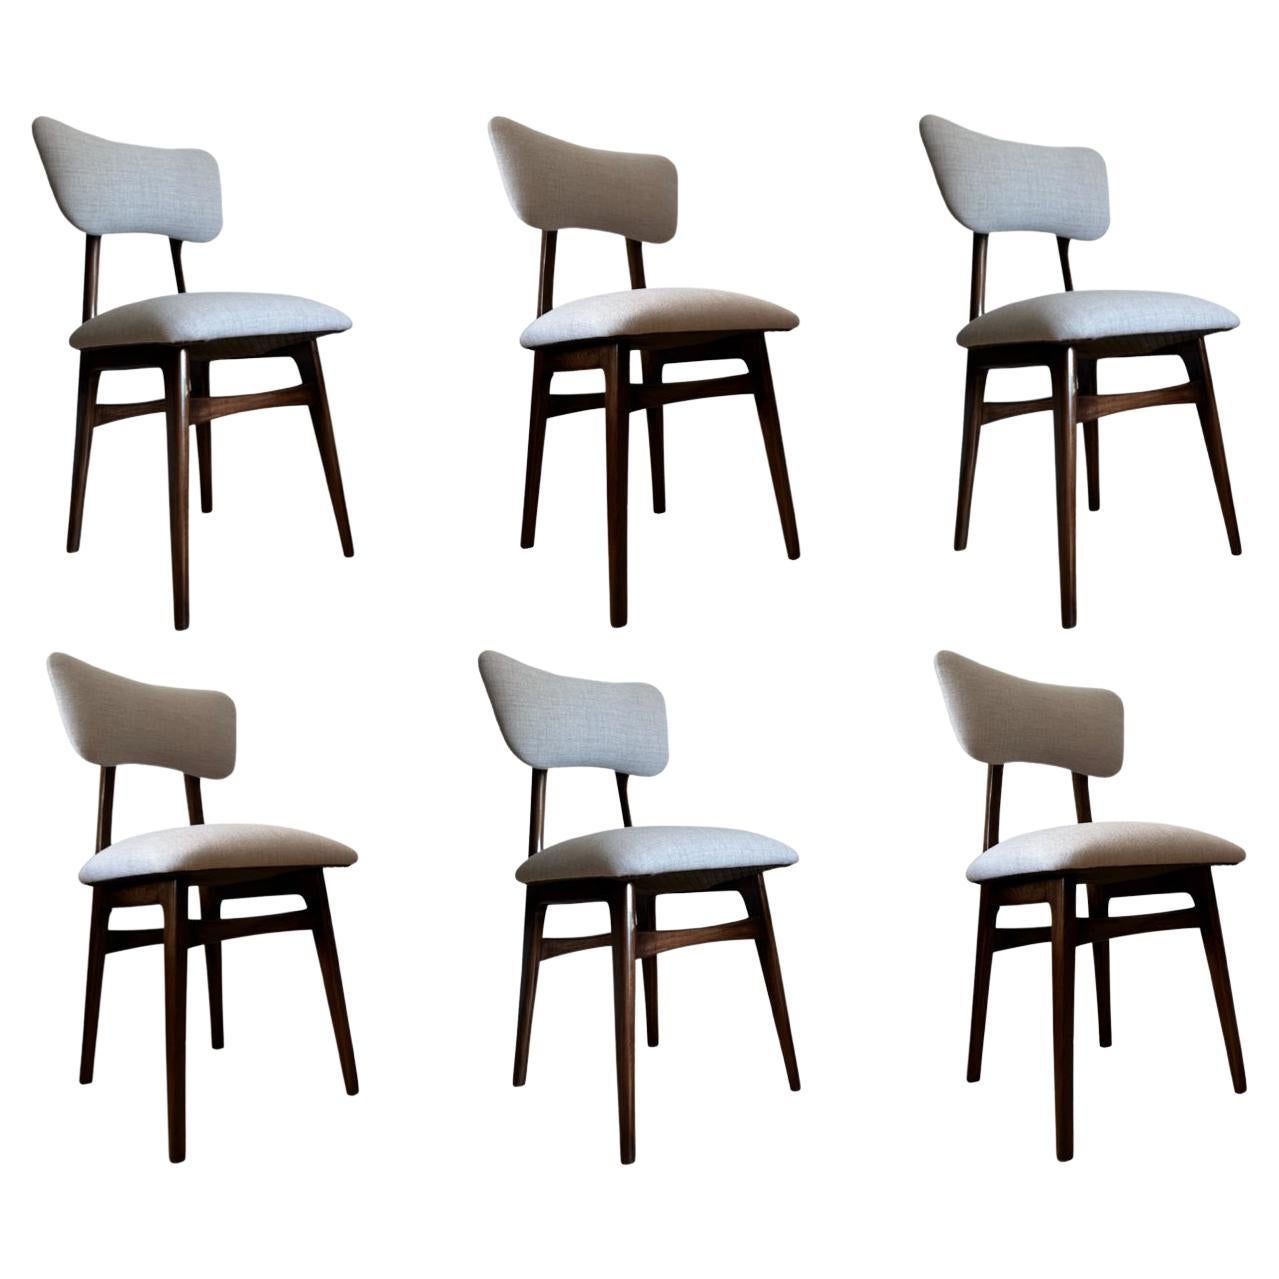 Set of 6 Midcentury Beige and Grey Dining Chairs, Europe, 1960s For Sale